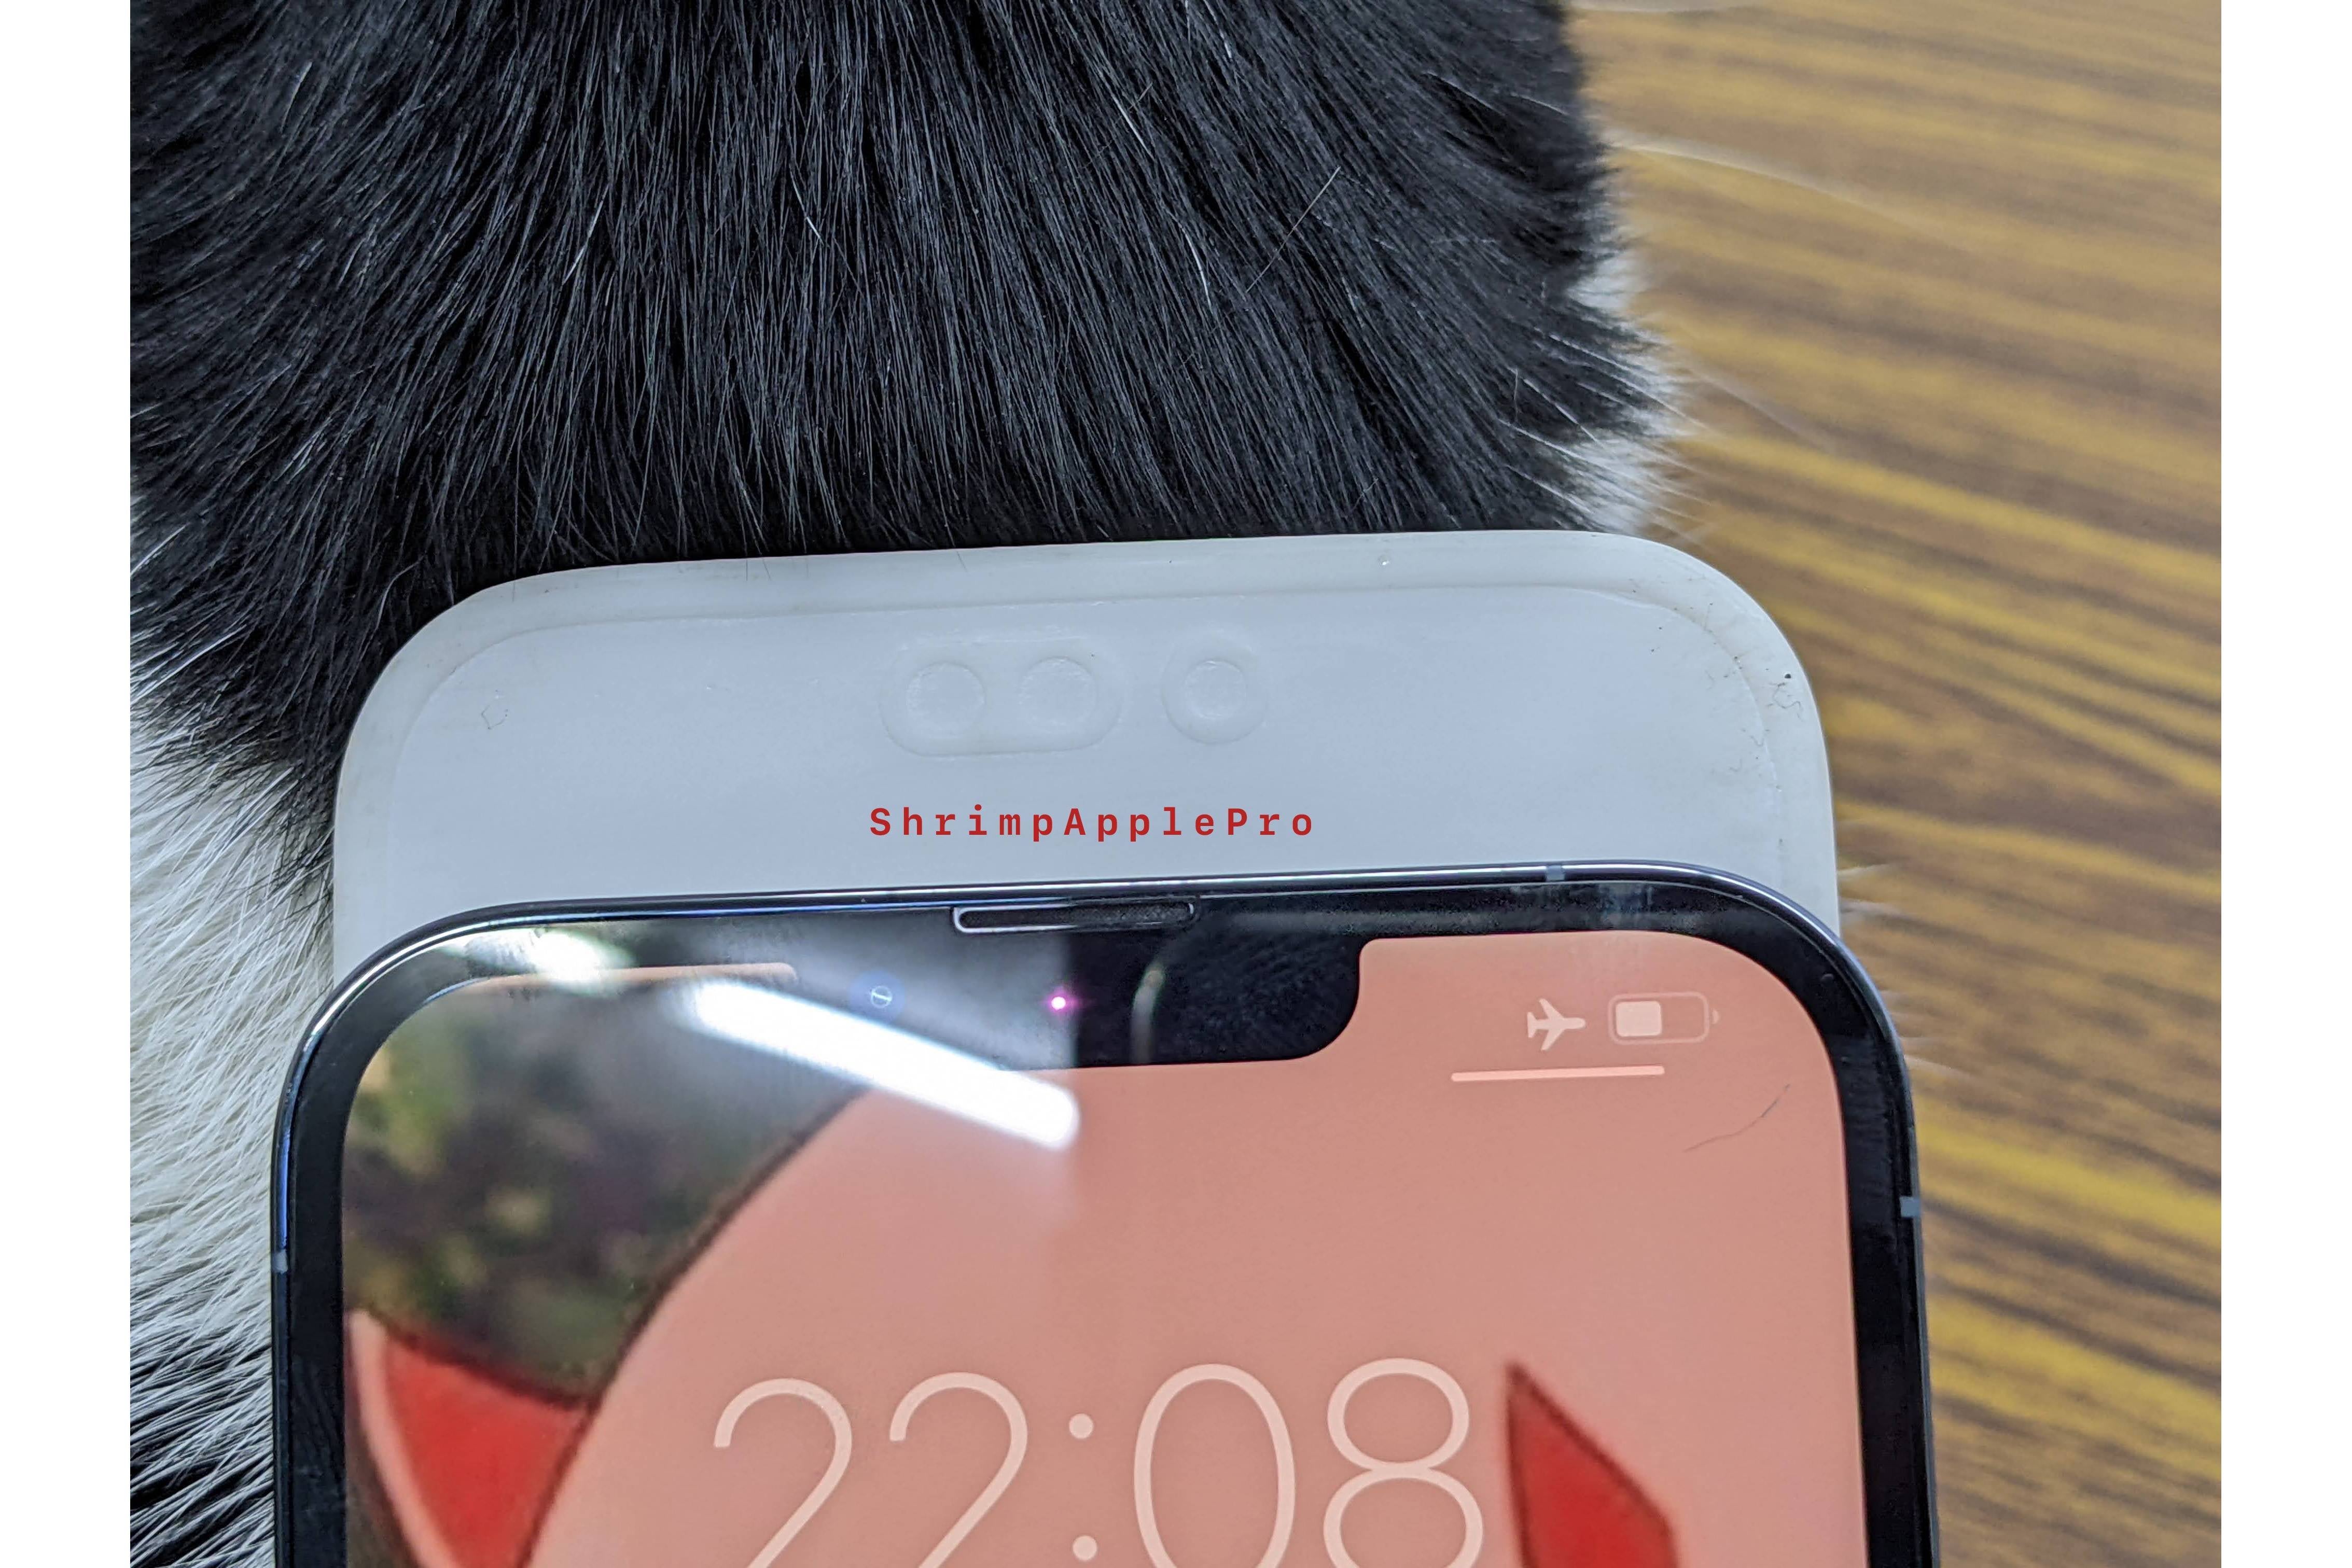 iPhone 14 Pro Max's cutouts seem to be bigger than most users would like - New dummy unit shows how big the cutouts on iPhone 14 Pro Max could be